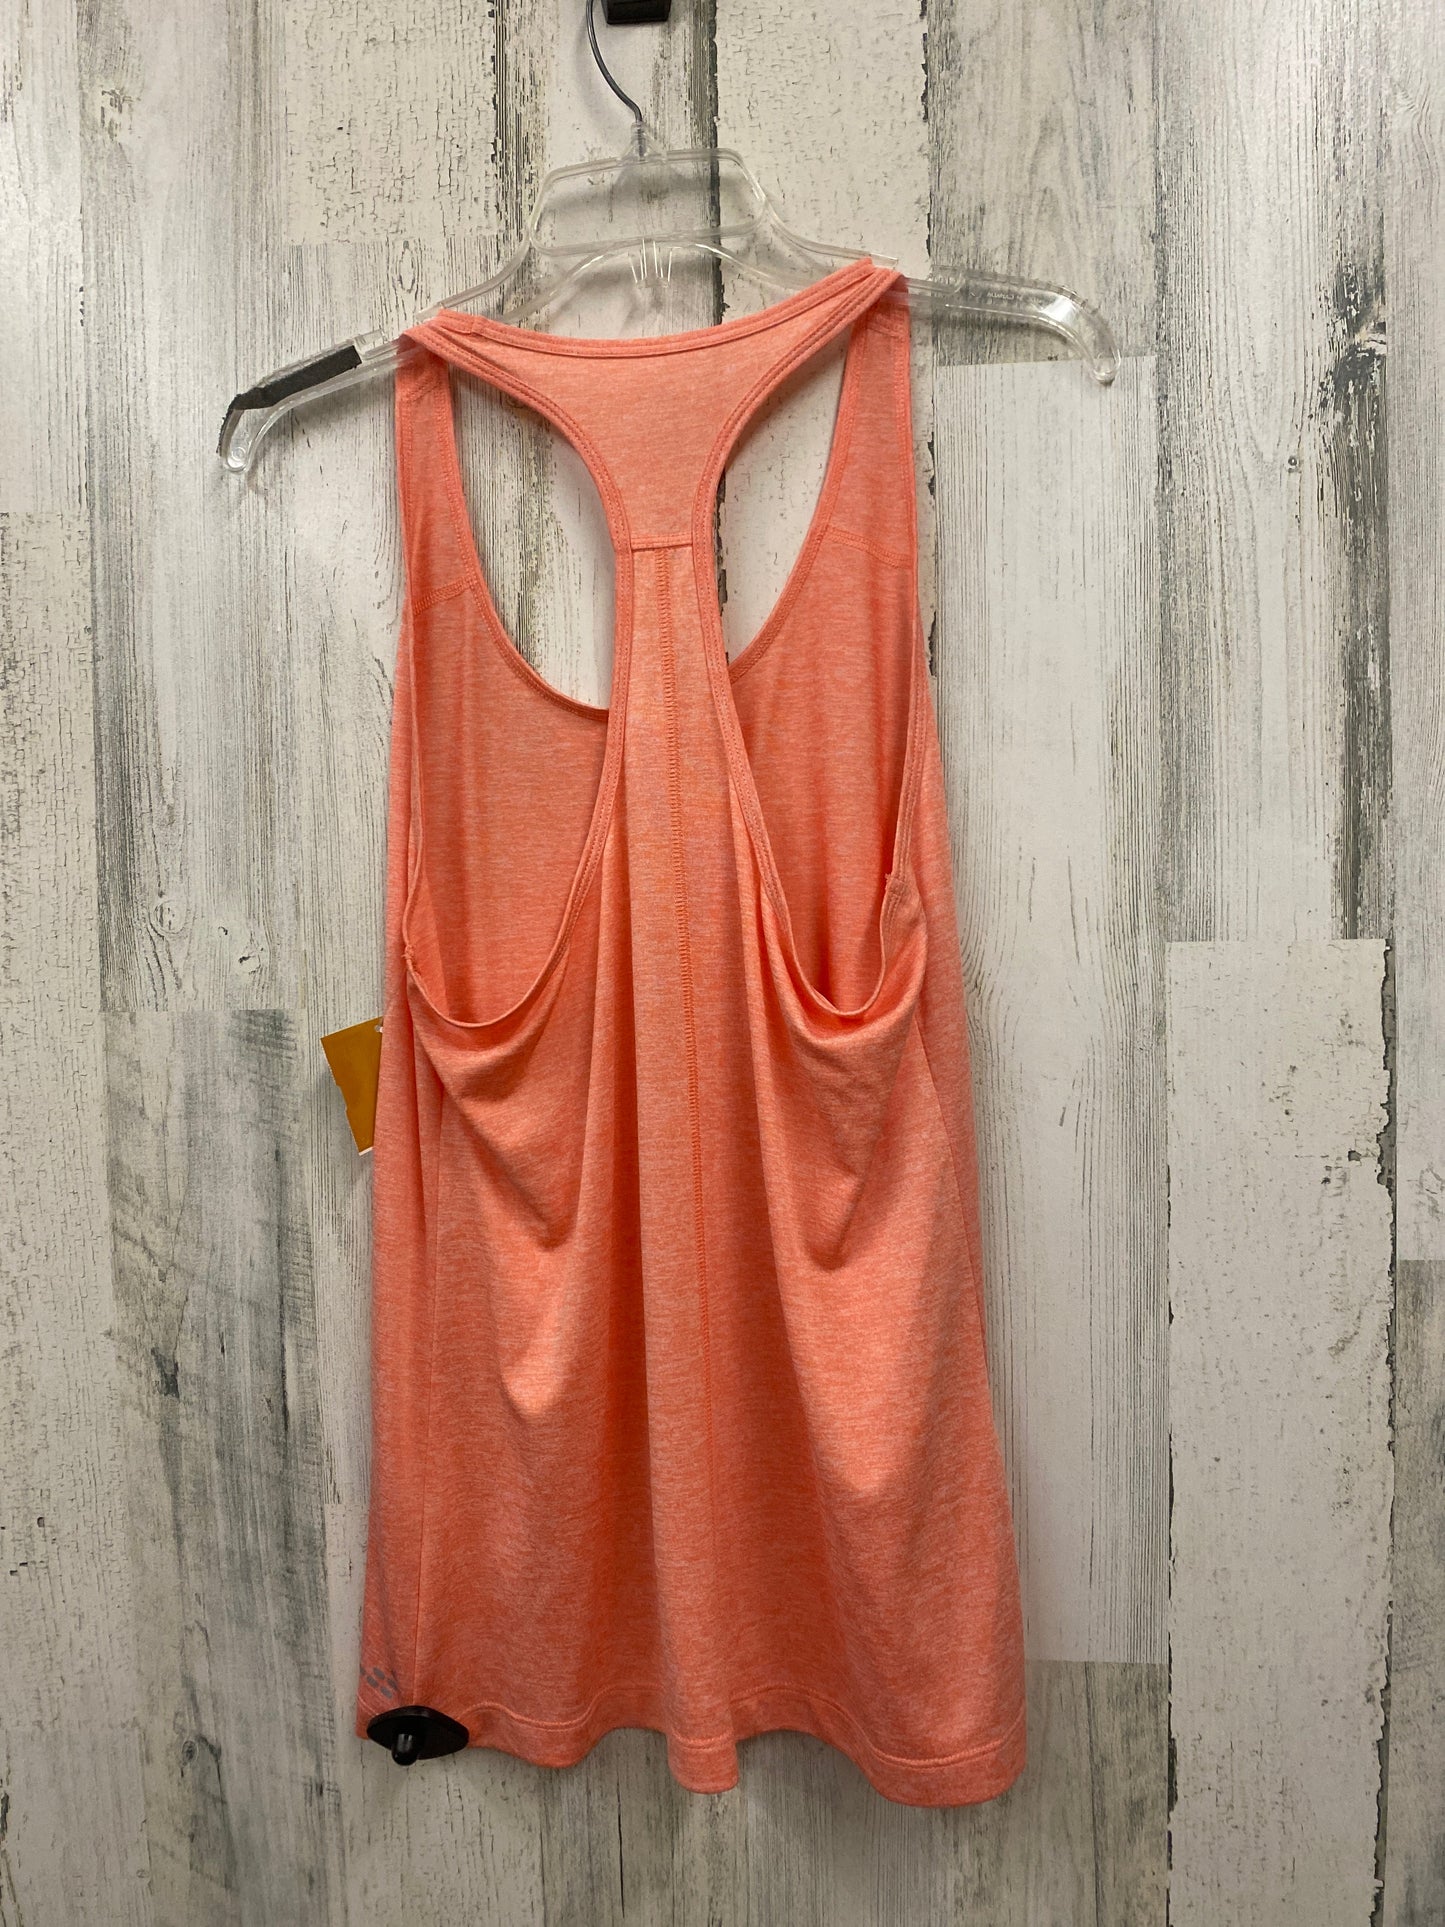 Athletic Tank Top By Bcg  Size: M